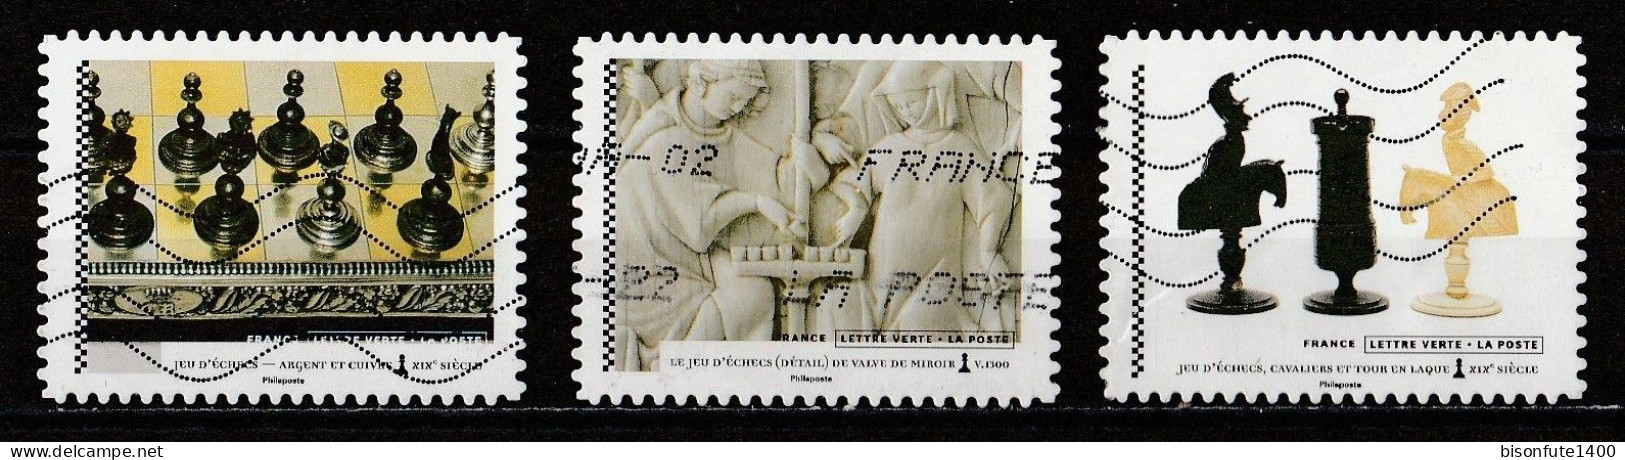 Used stamps - France 2021 : Timbres adhésif Yvert & Tellier n